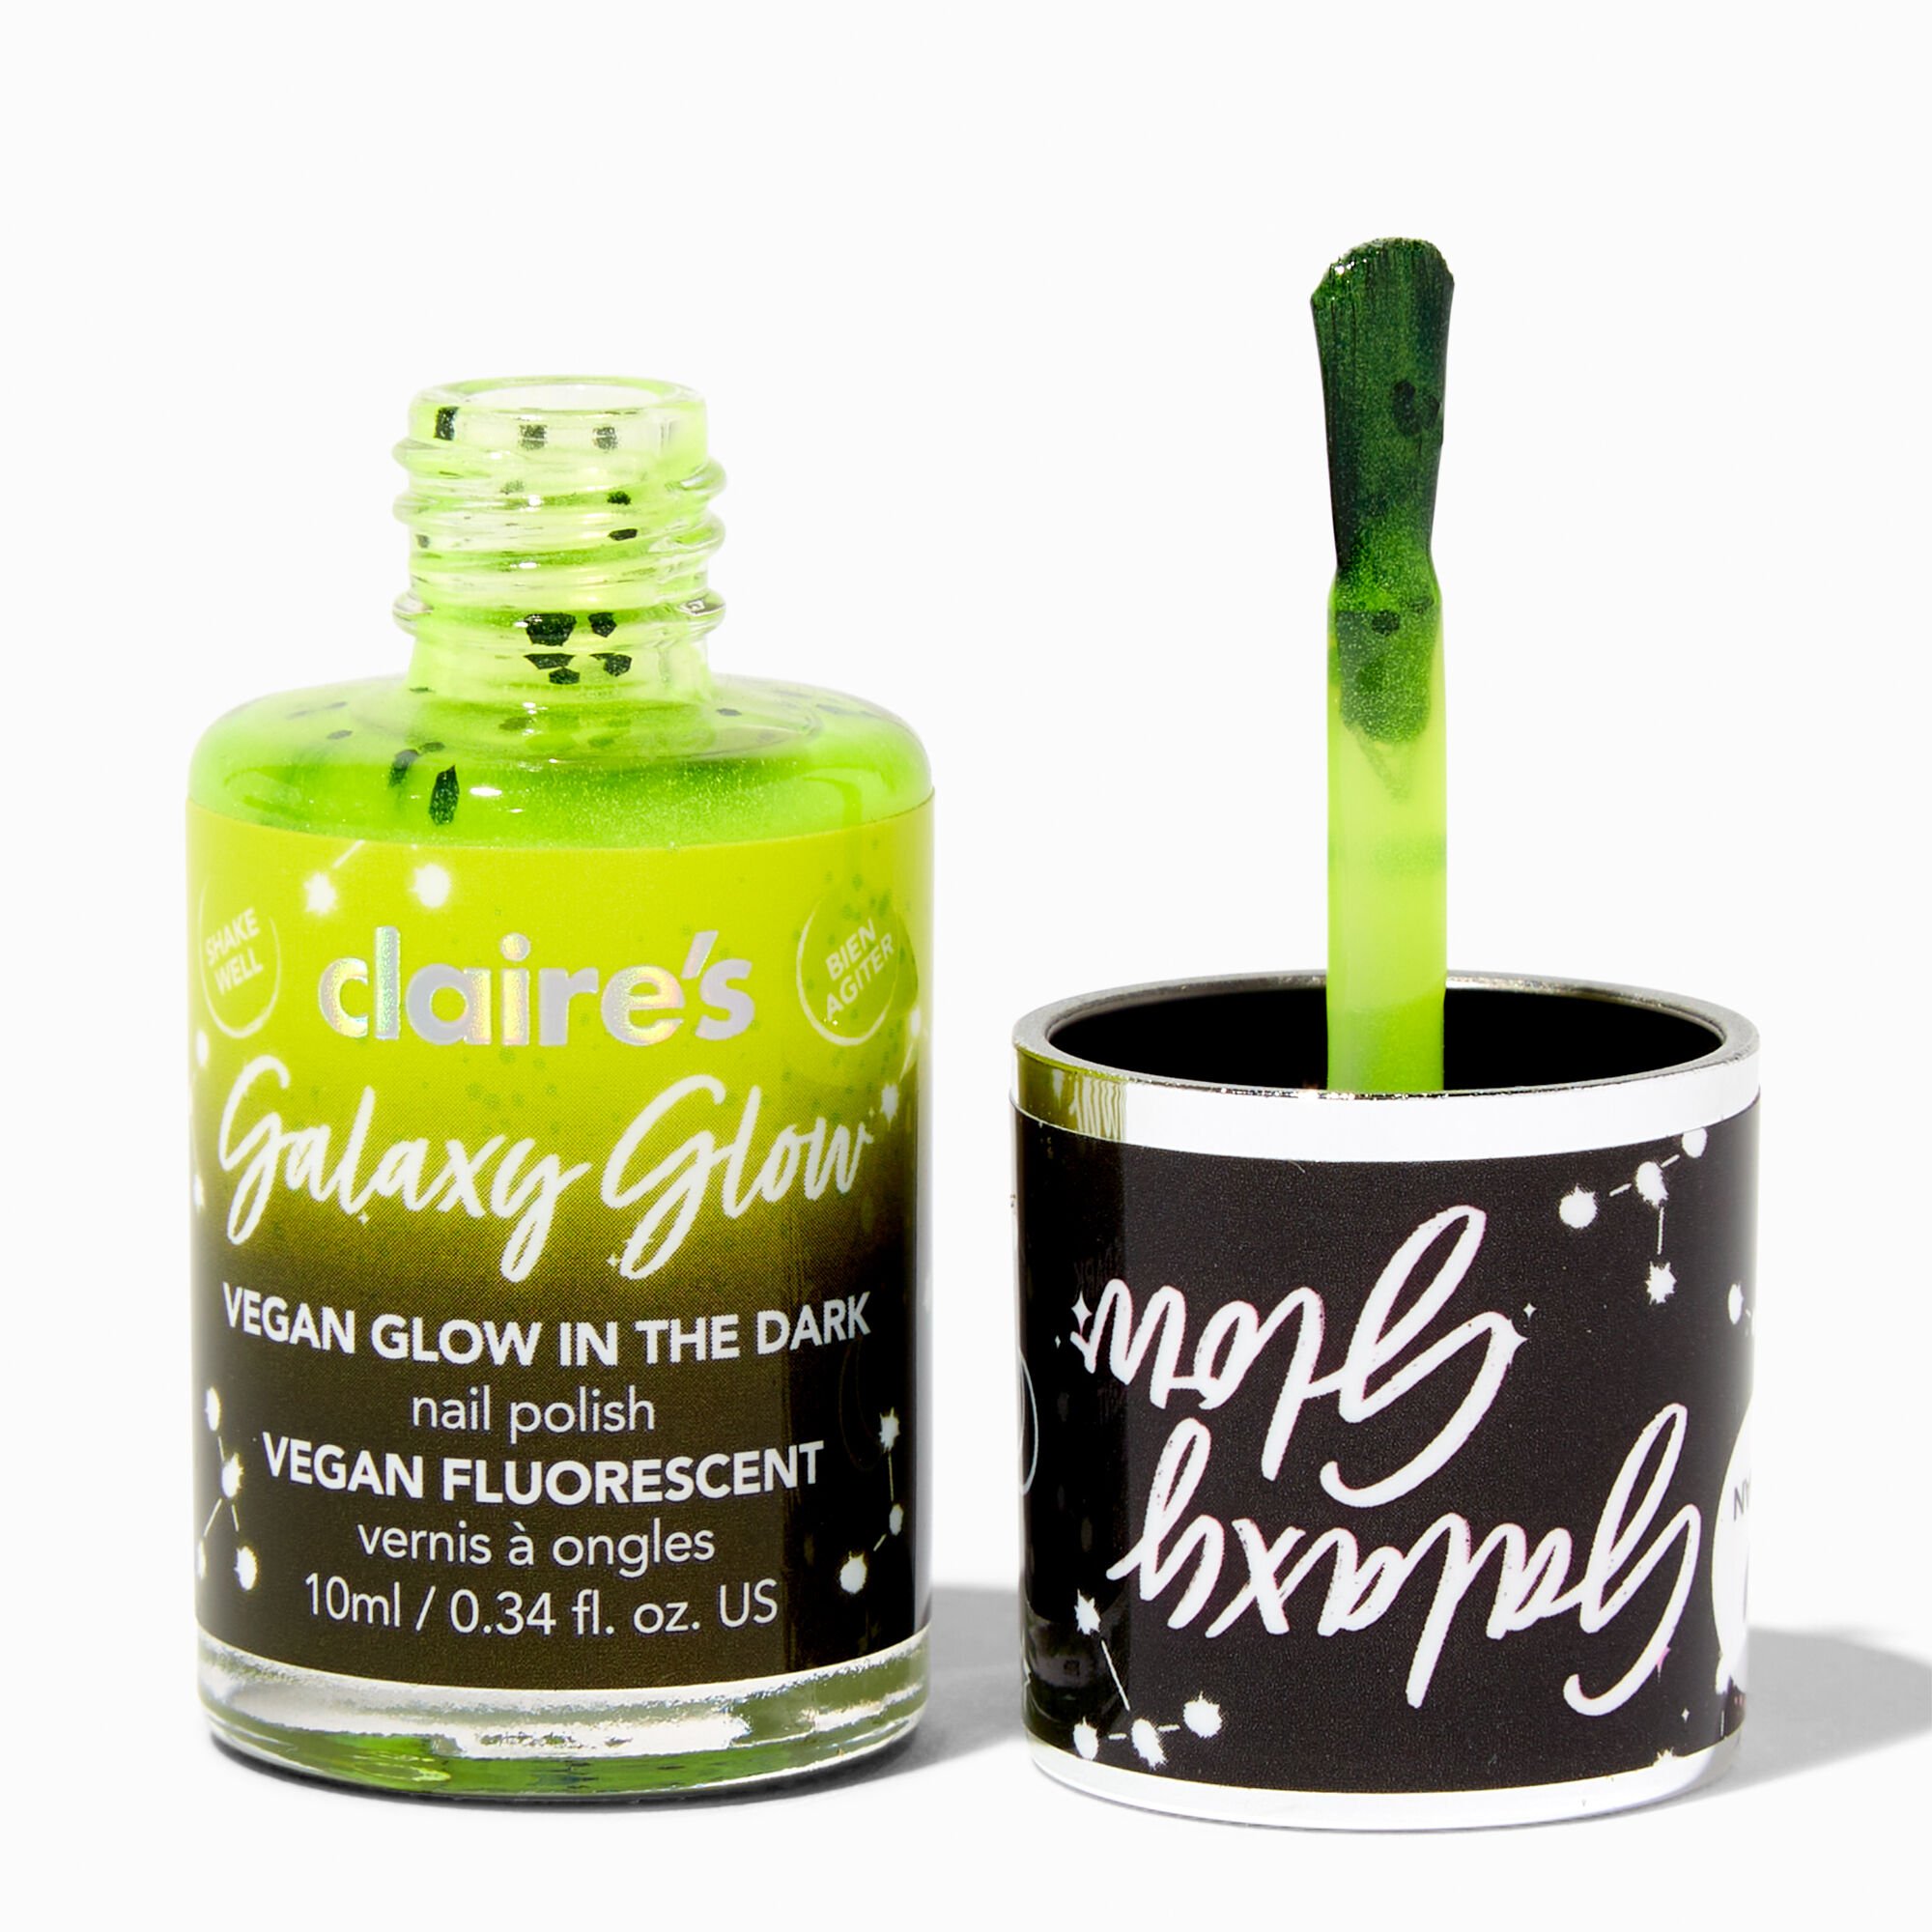 View Claires Galaxy Glow Vegan In The Dark Nail Polish Sparkling Lights information